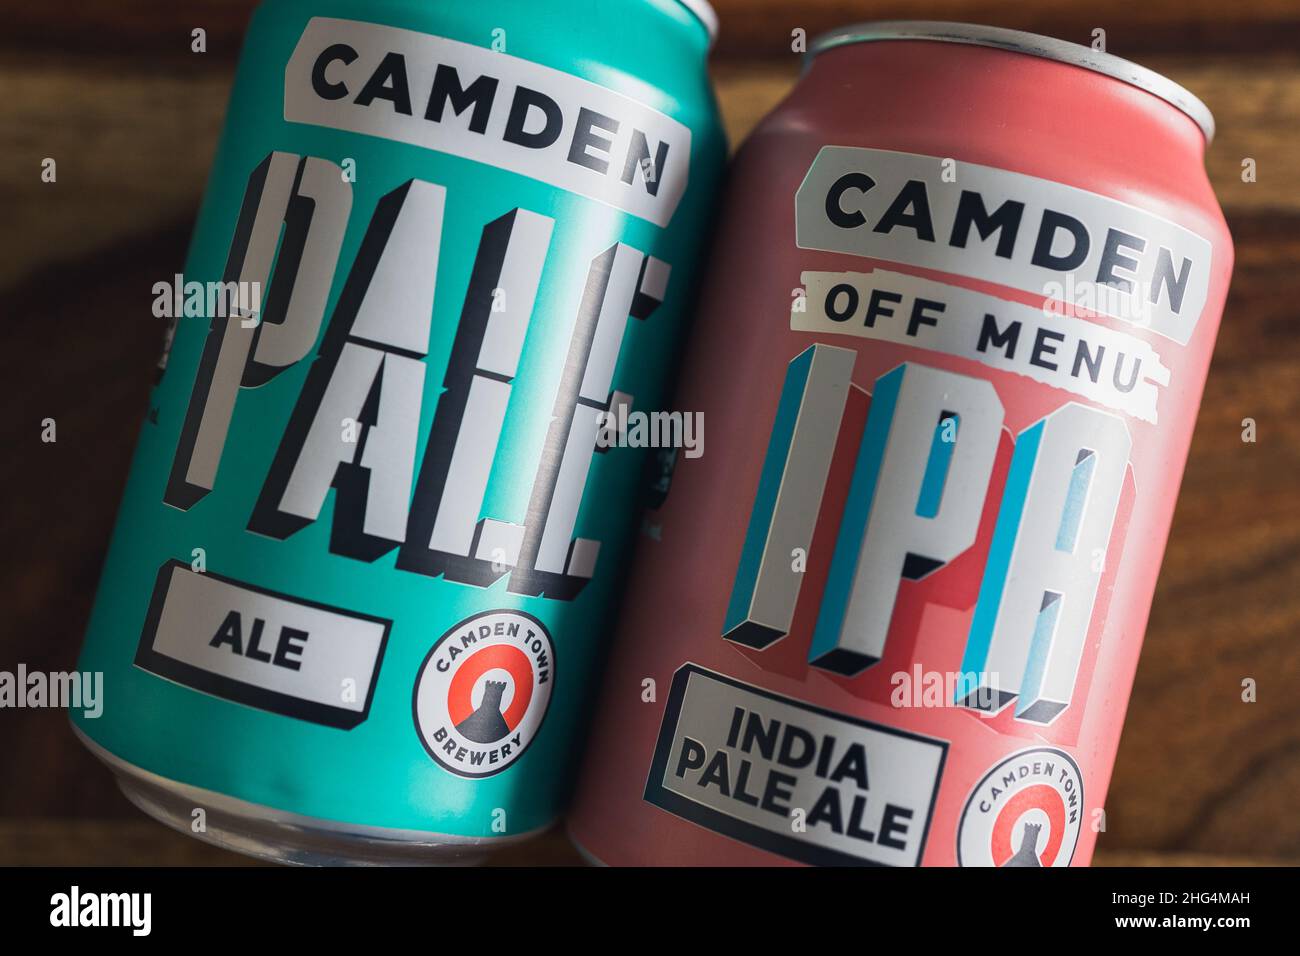 LONDON - JANUARY 18, 2022: Camden craft beer pale ale cans Stock Photo